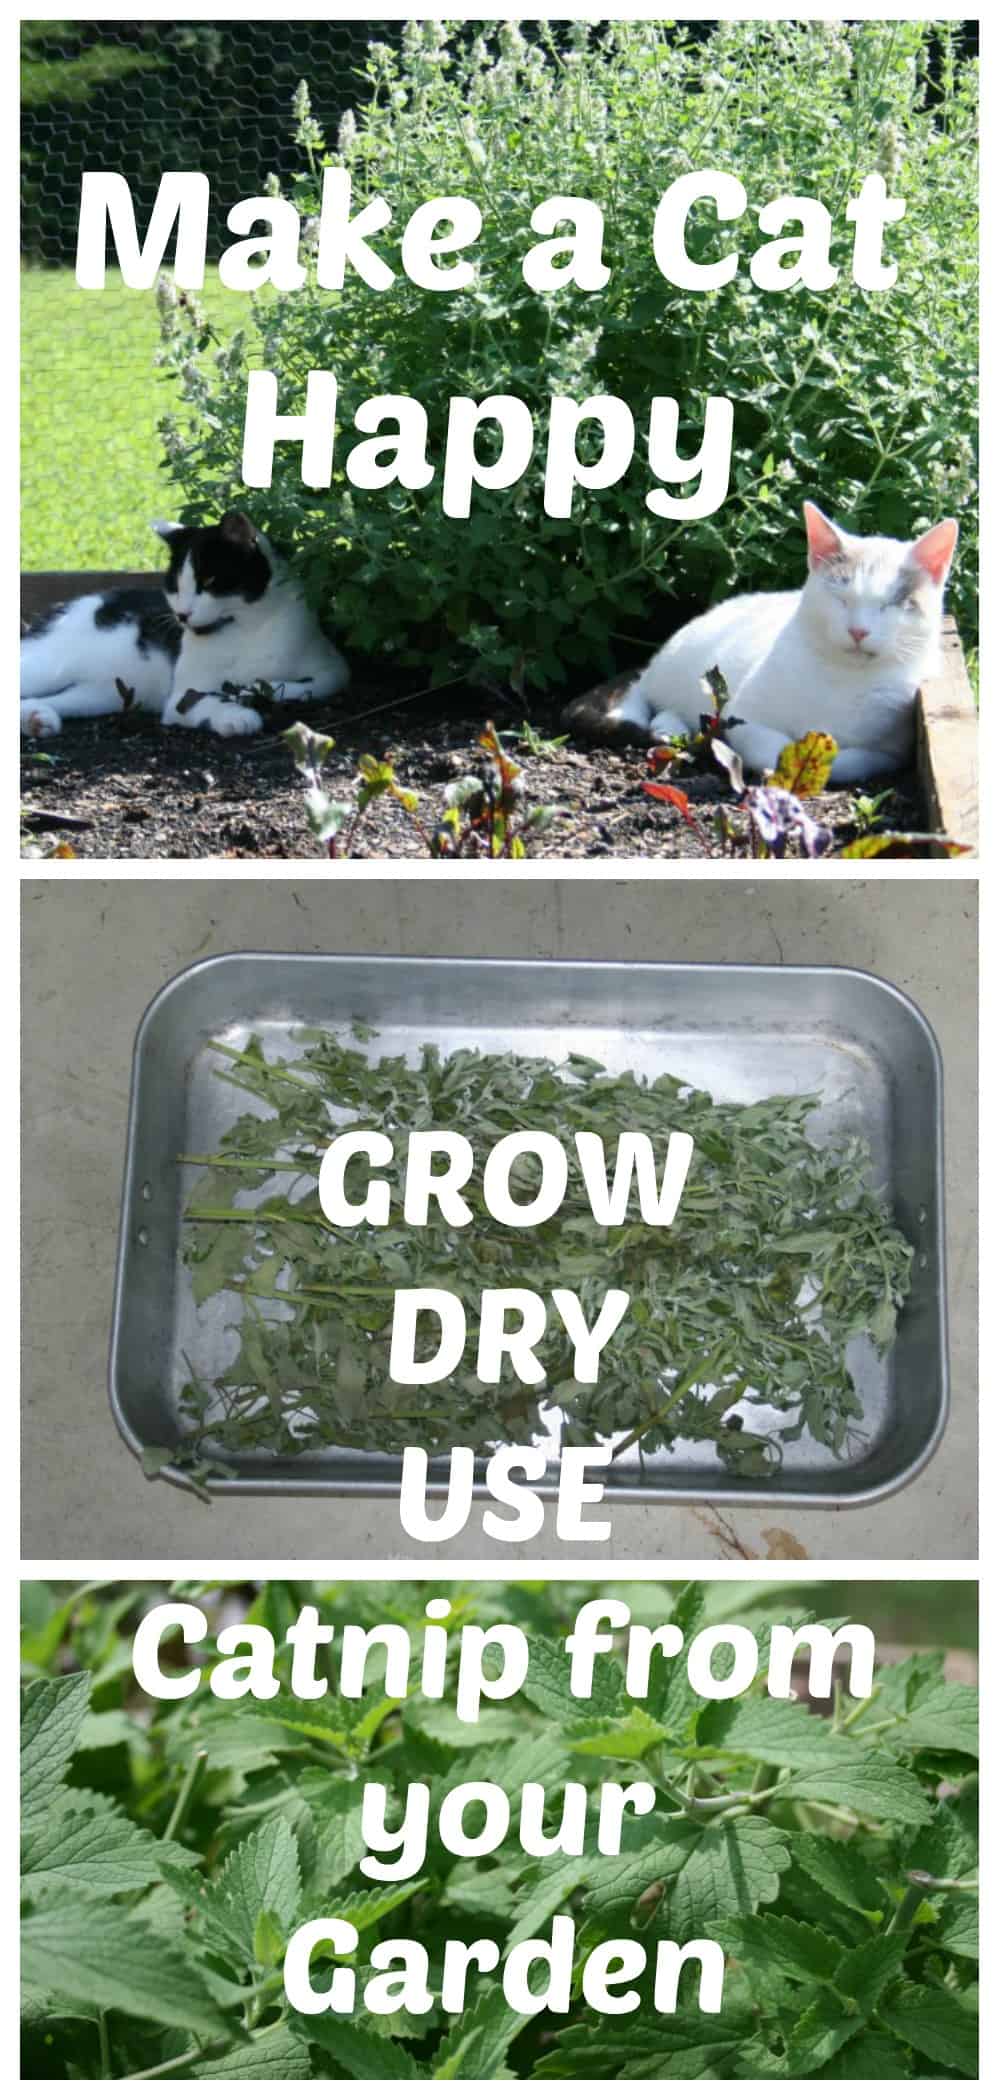 How to Grow Your Own Catnip